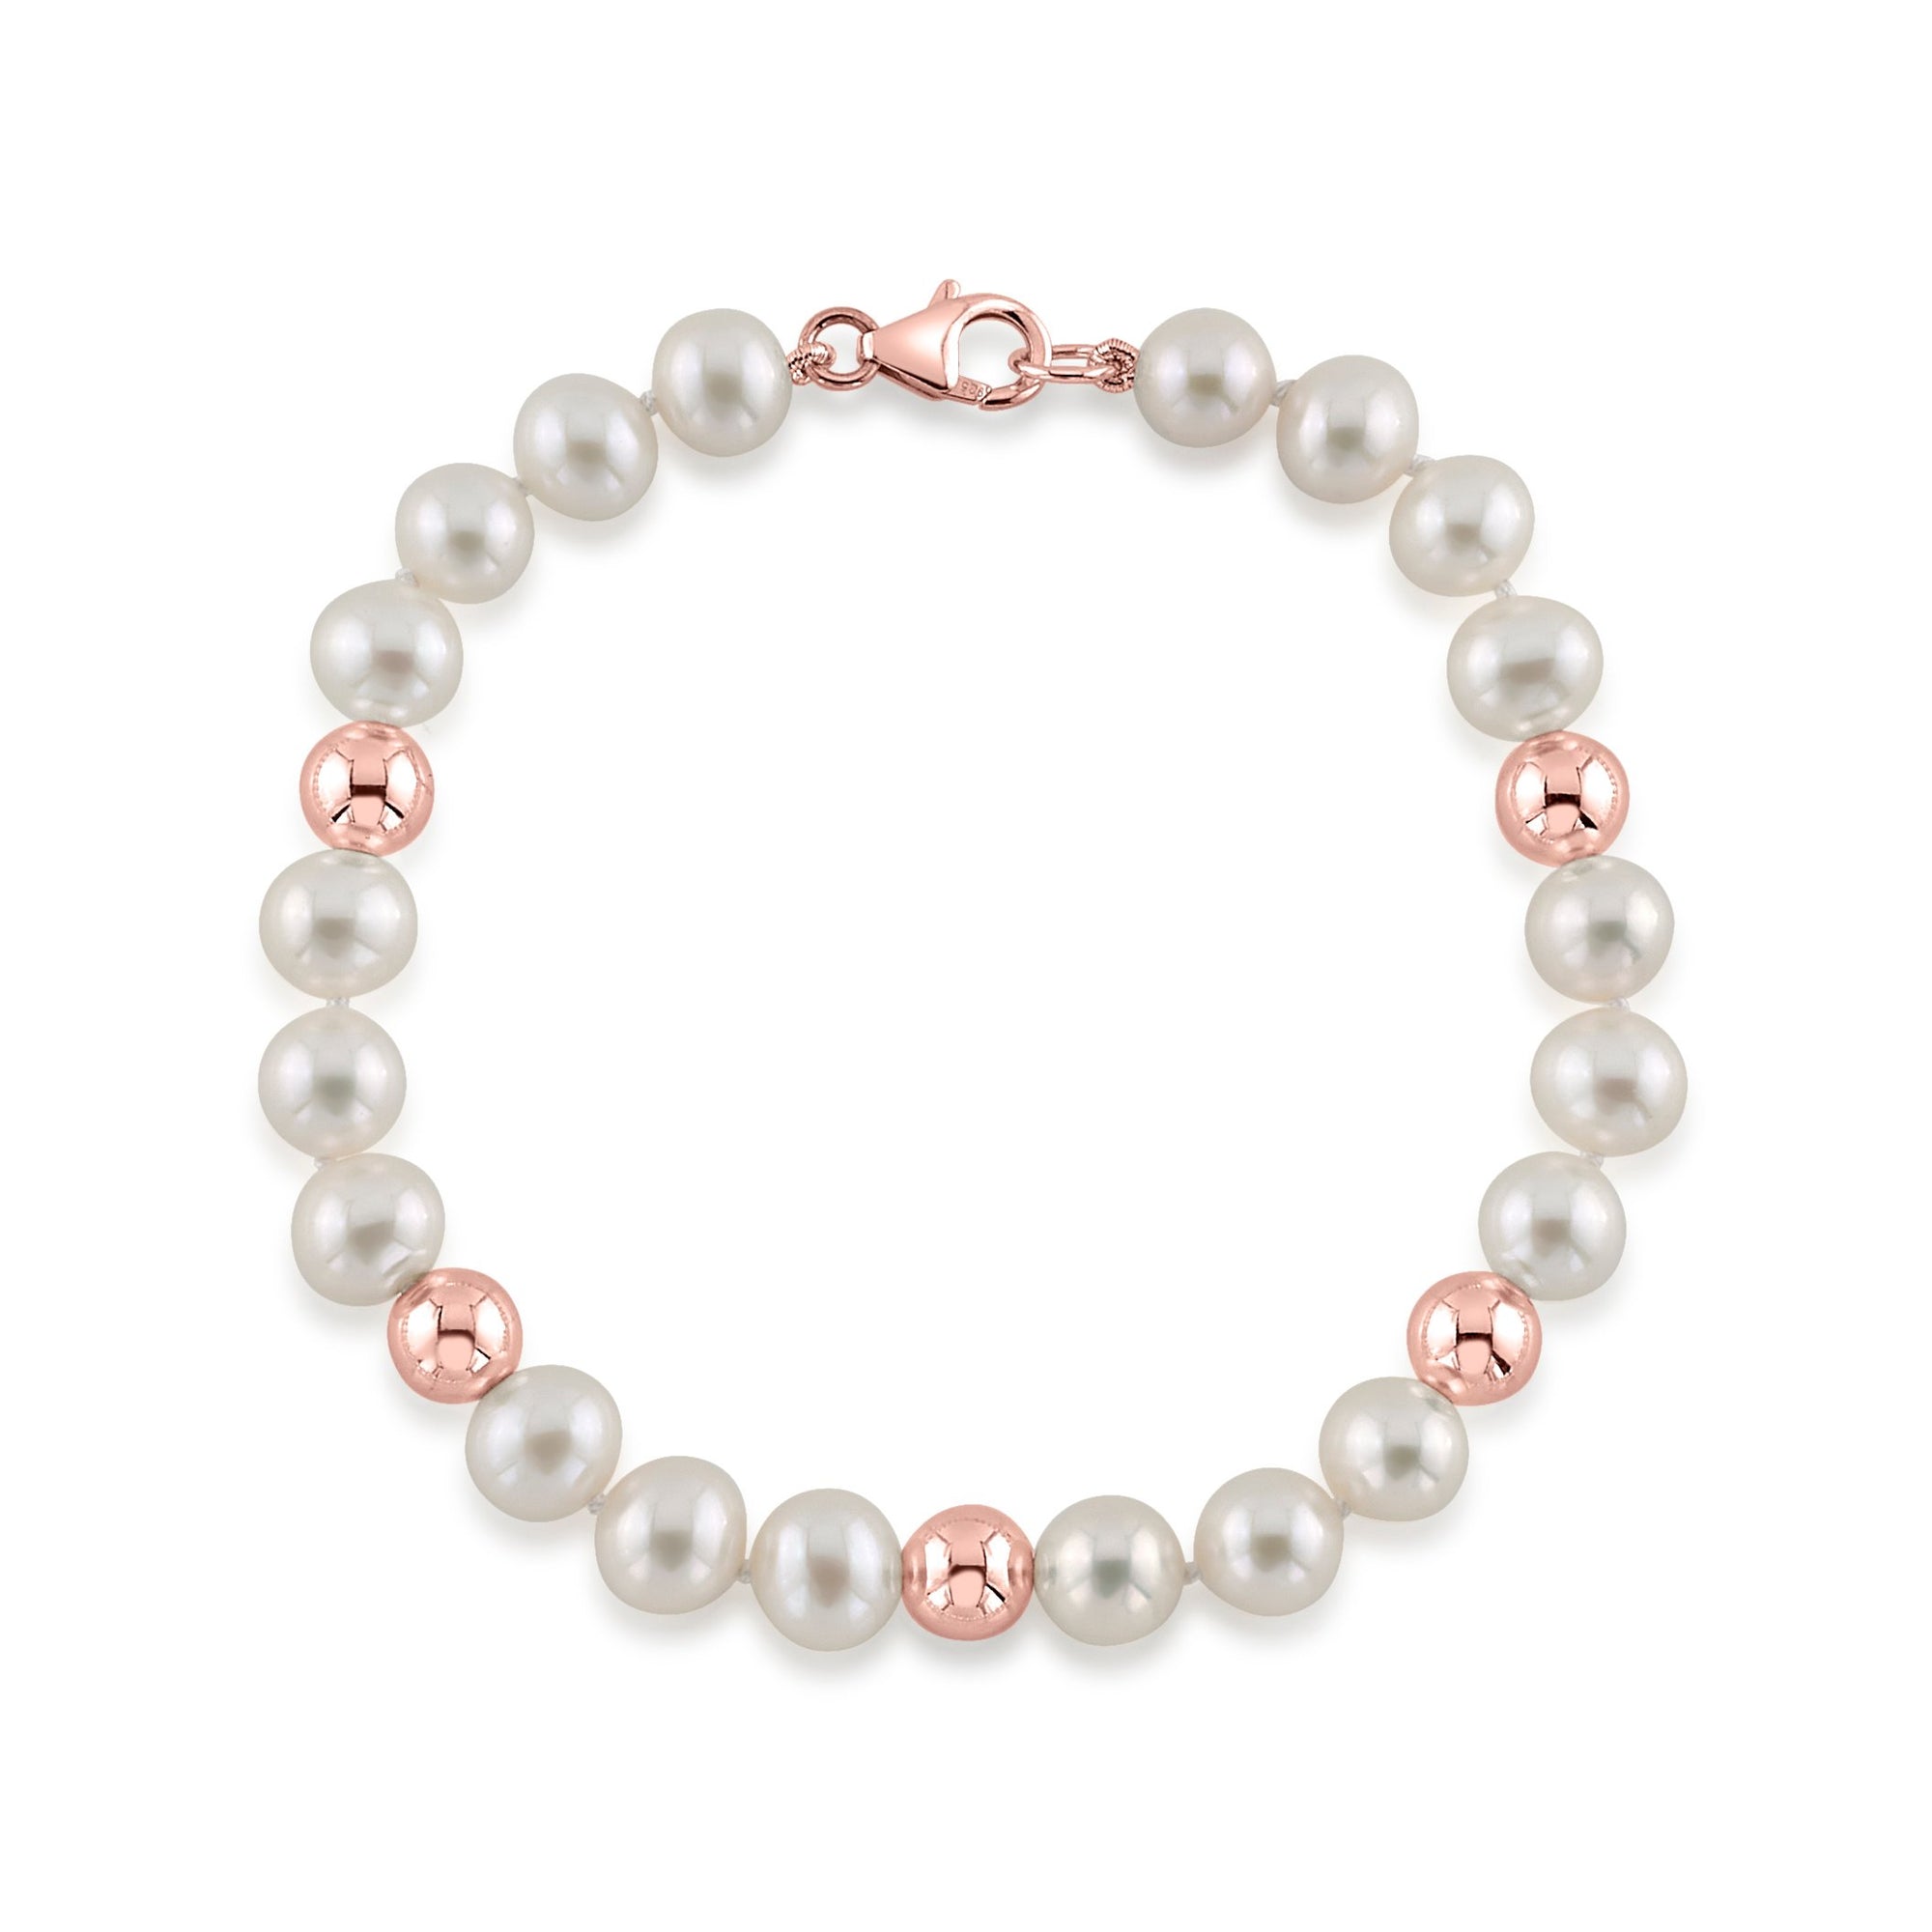 7.5-8.0mm White Freshwater and Rose Gold Cultured Pearl Corey Bracelet